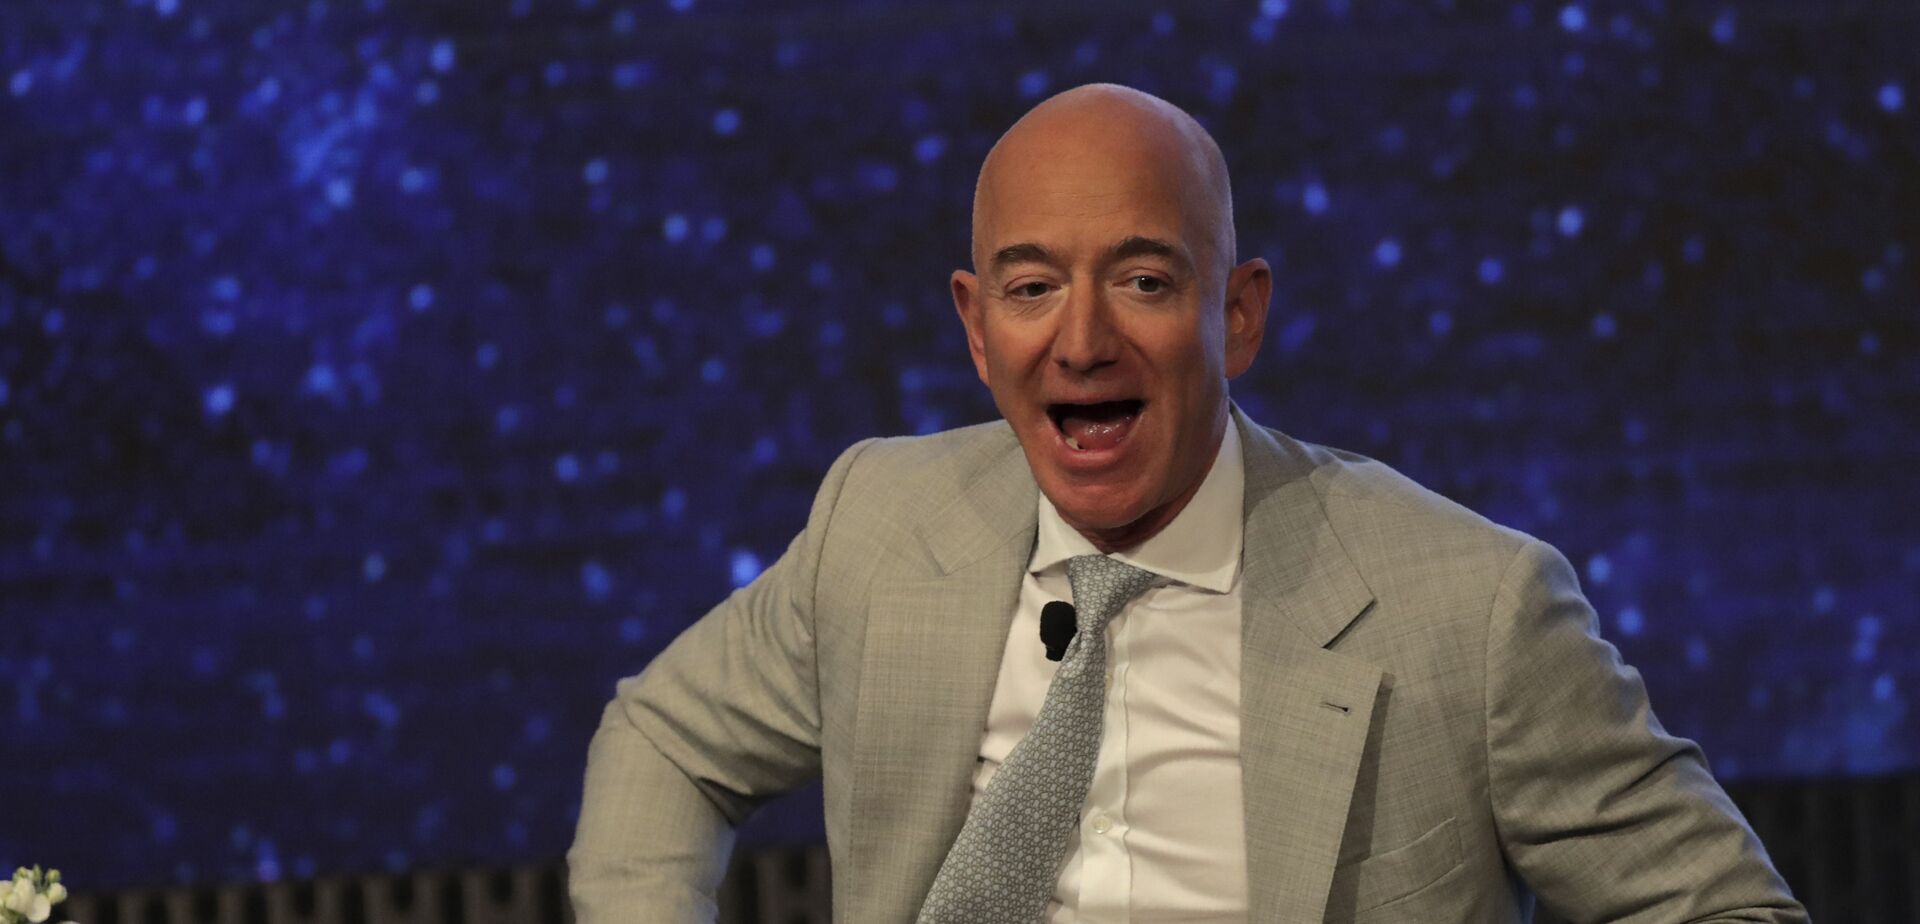 Amazon founder Jeff Bezos during the JFK Space Summit at the John F. Kennedy Presidential Library in Boston, Wednesday, June 19, 2019 - Sputnik International, 1920, 07.09.2021